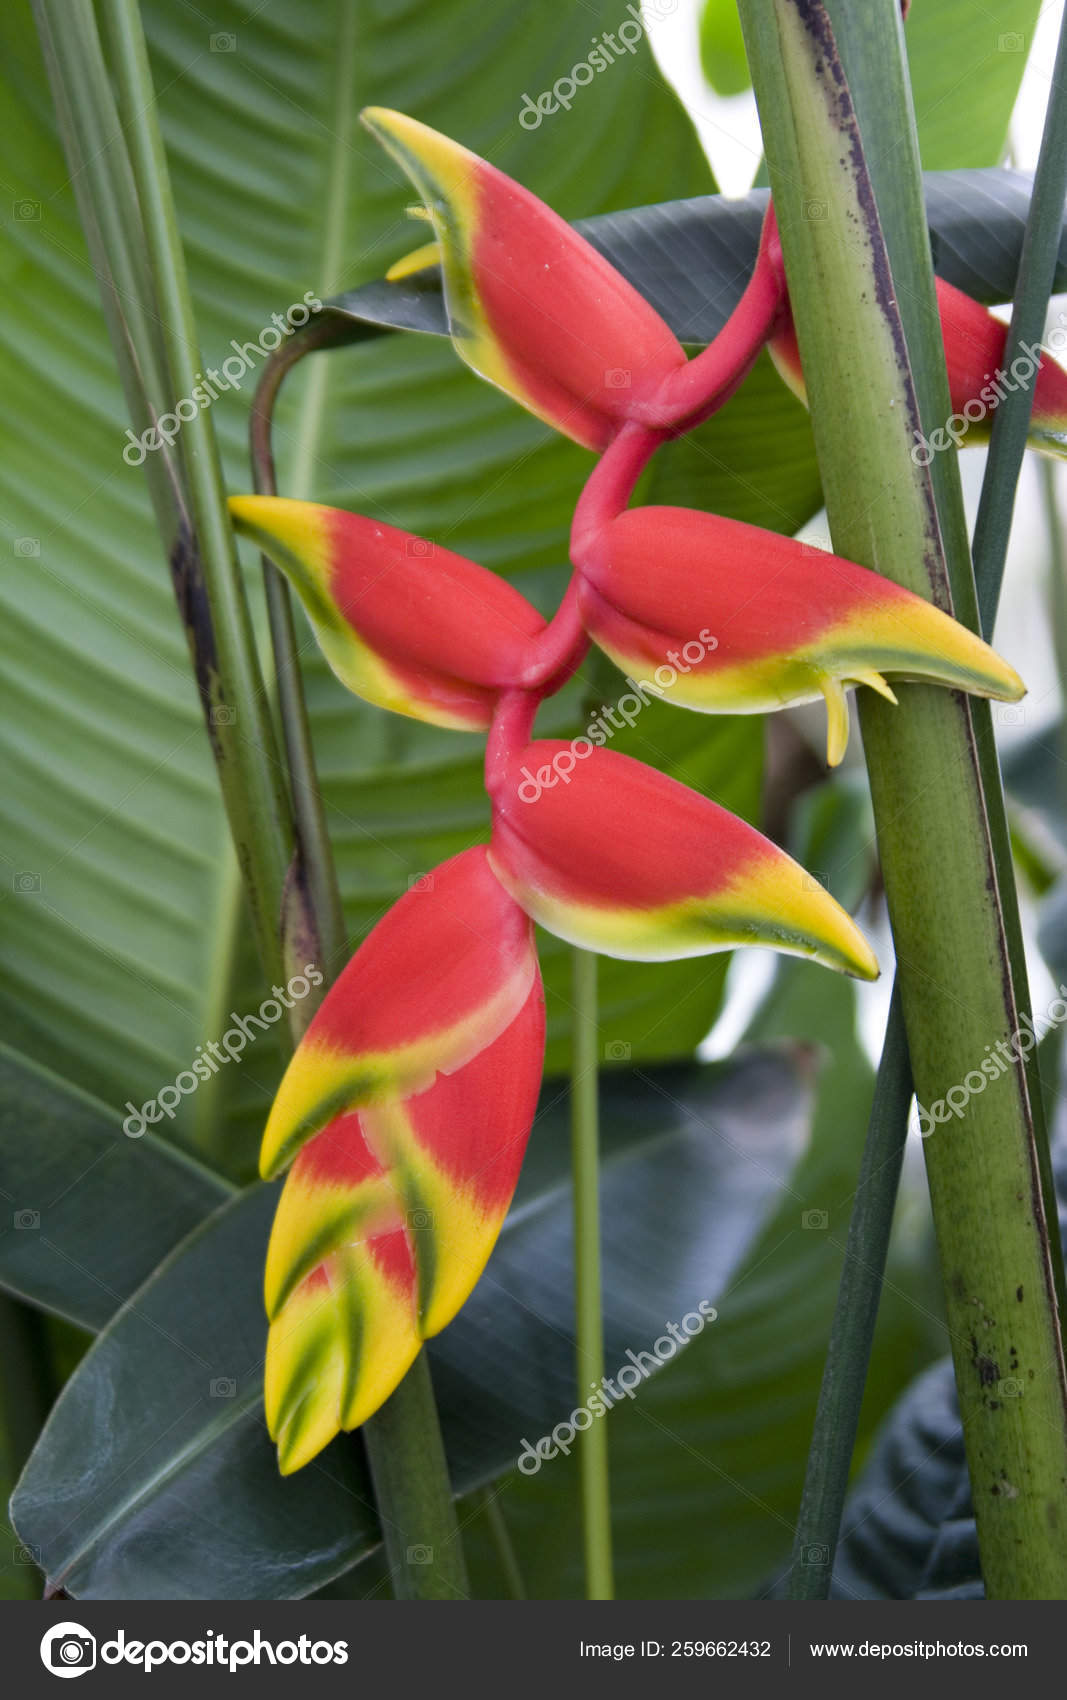 Heliconia Genus 100 200 Species Flowering Plants Native Tropical Americas Stock Photo C Yayimages 259662432